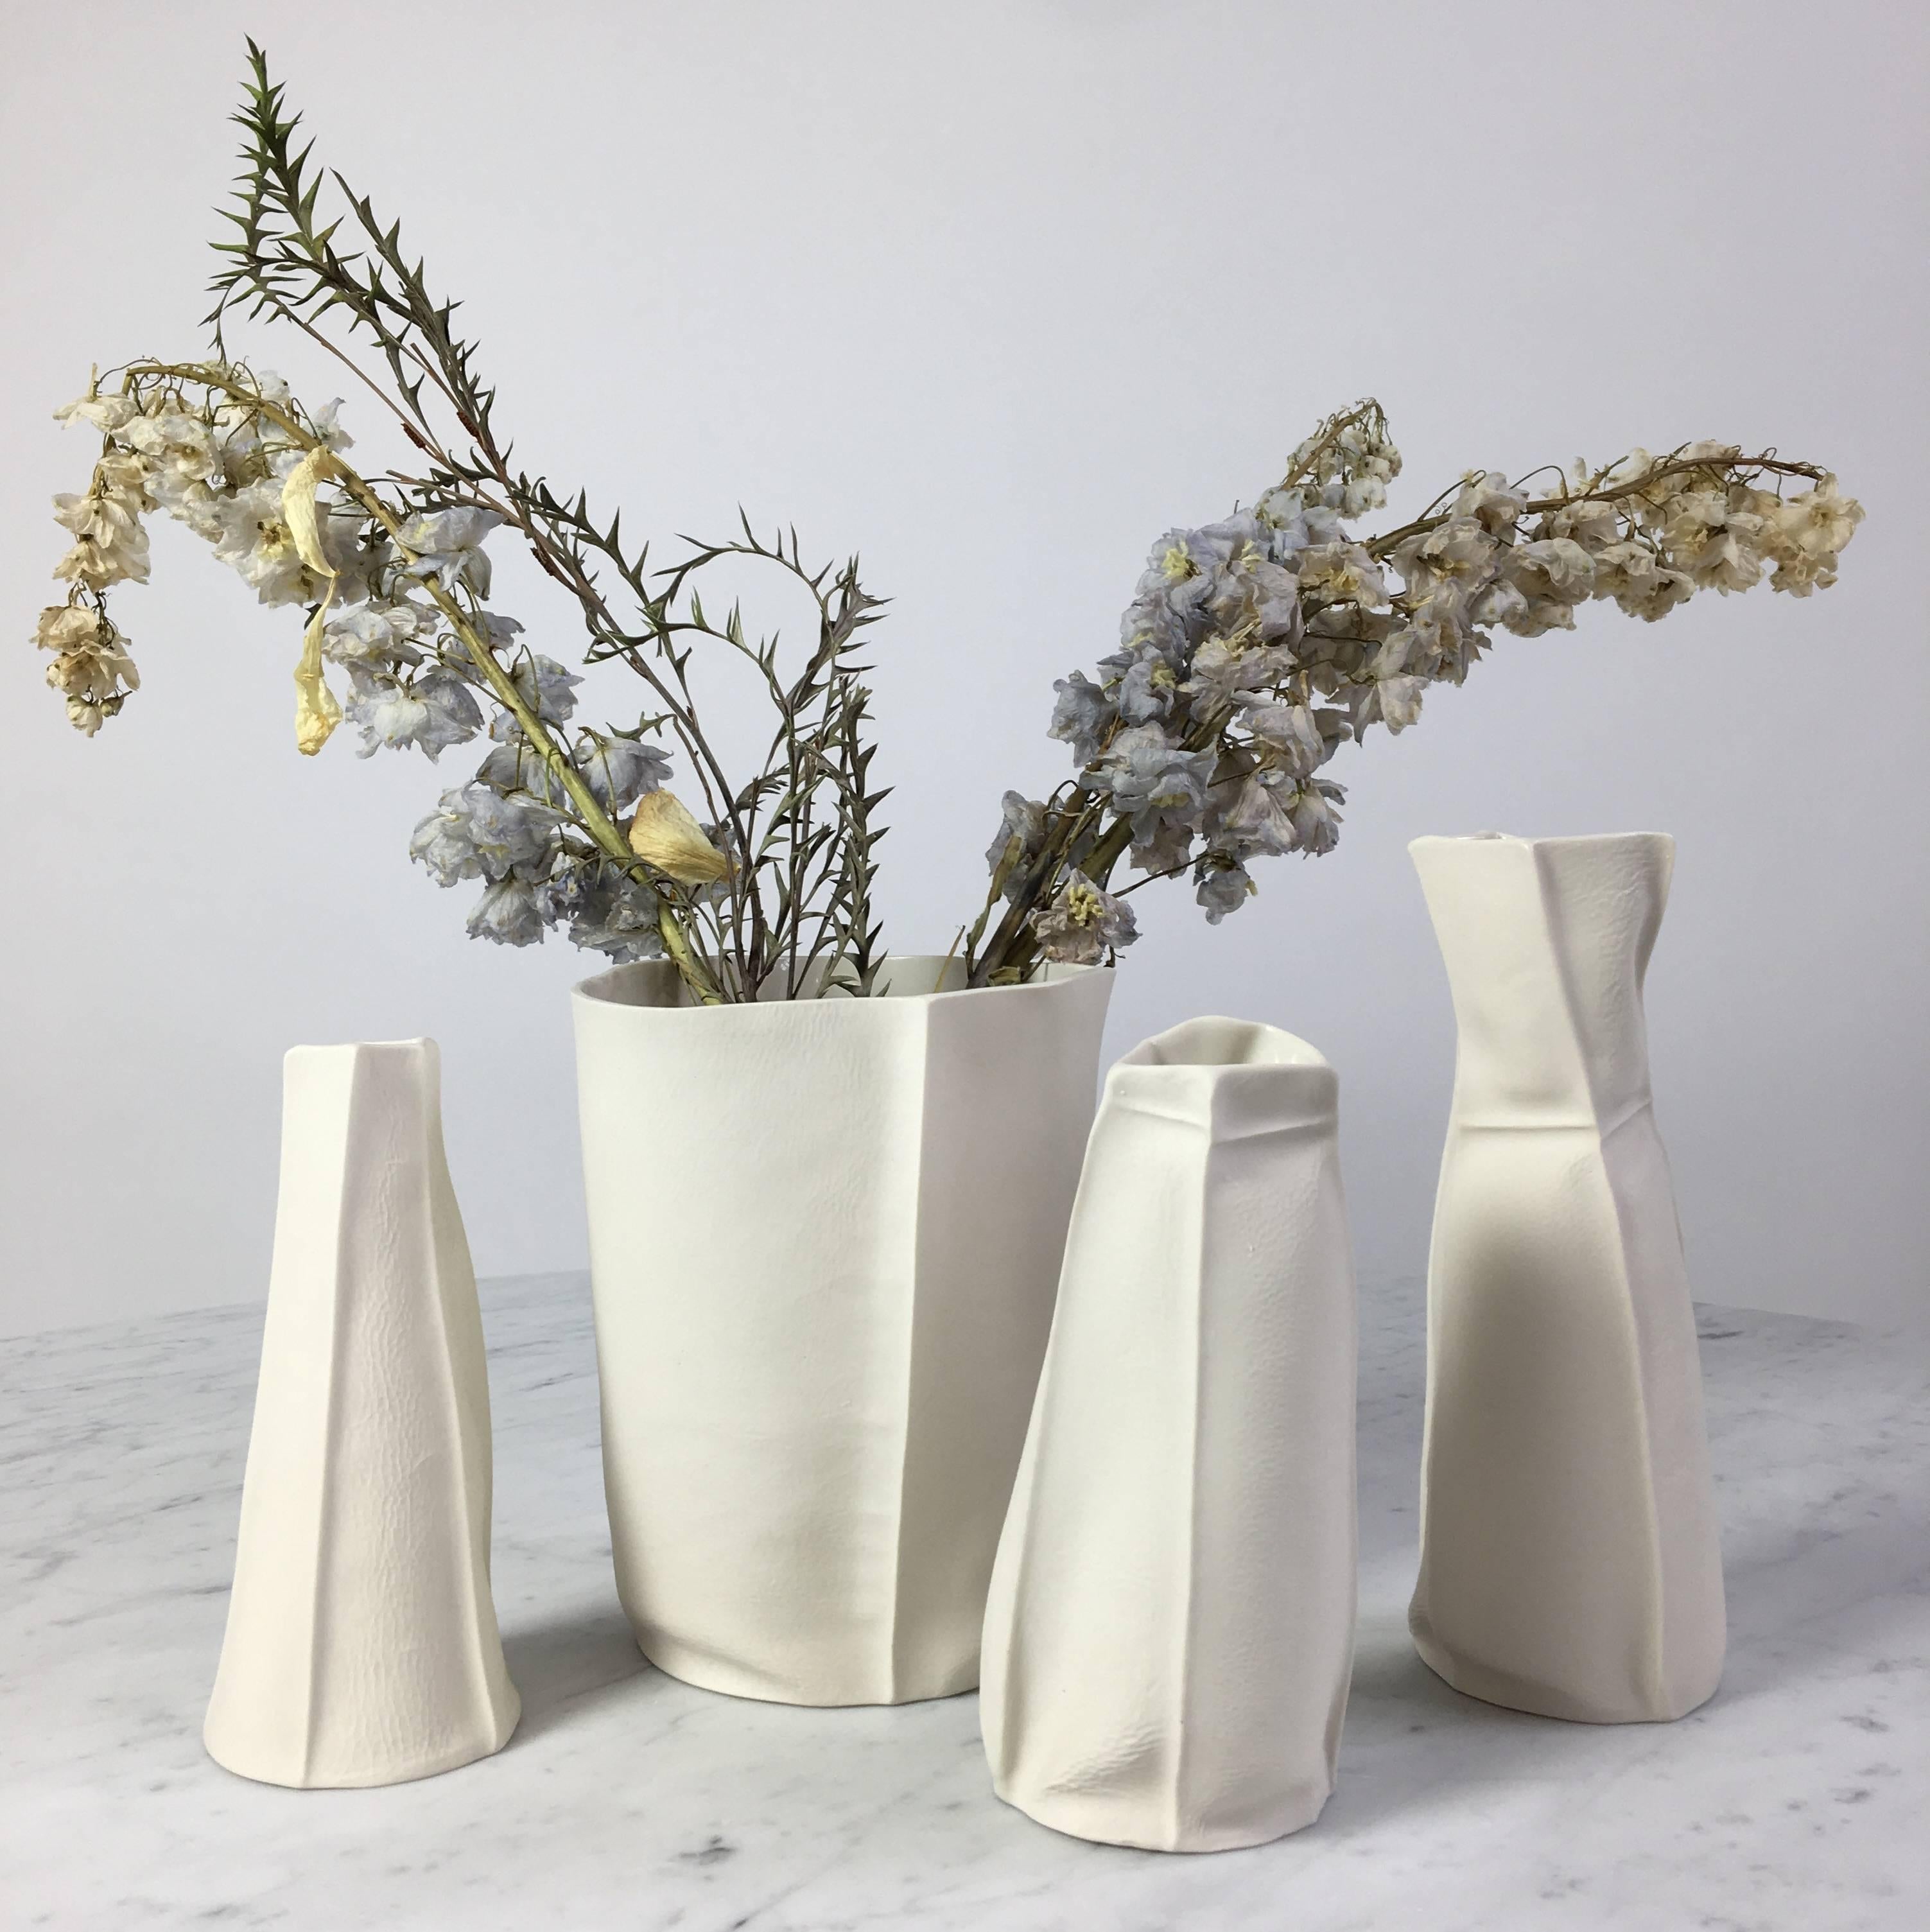 This listing is for a set of four unusual vaseses and vessels from the Kawa Porcelain series designed/made by Souda's Co-Owner, Luft Tanaka. Each piece has been made by casting liquid porcelain into a molds made entirely of leather. This